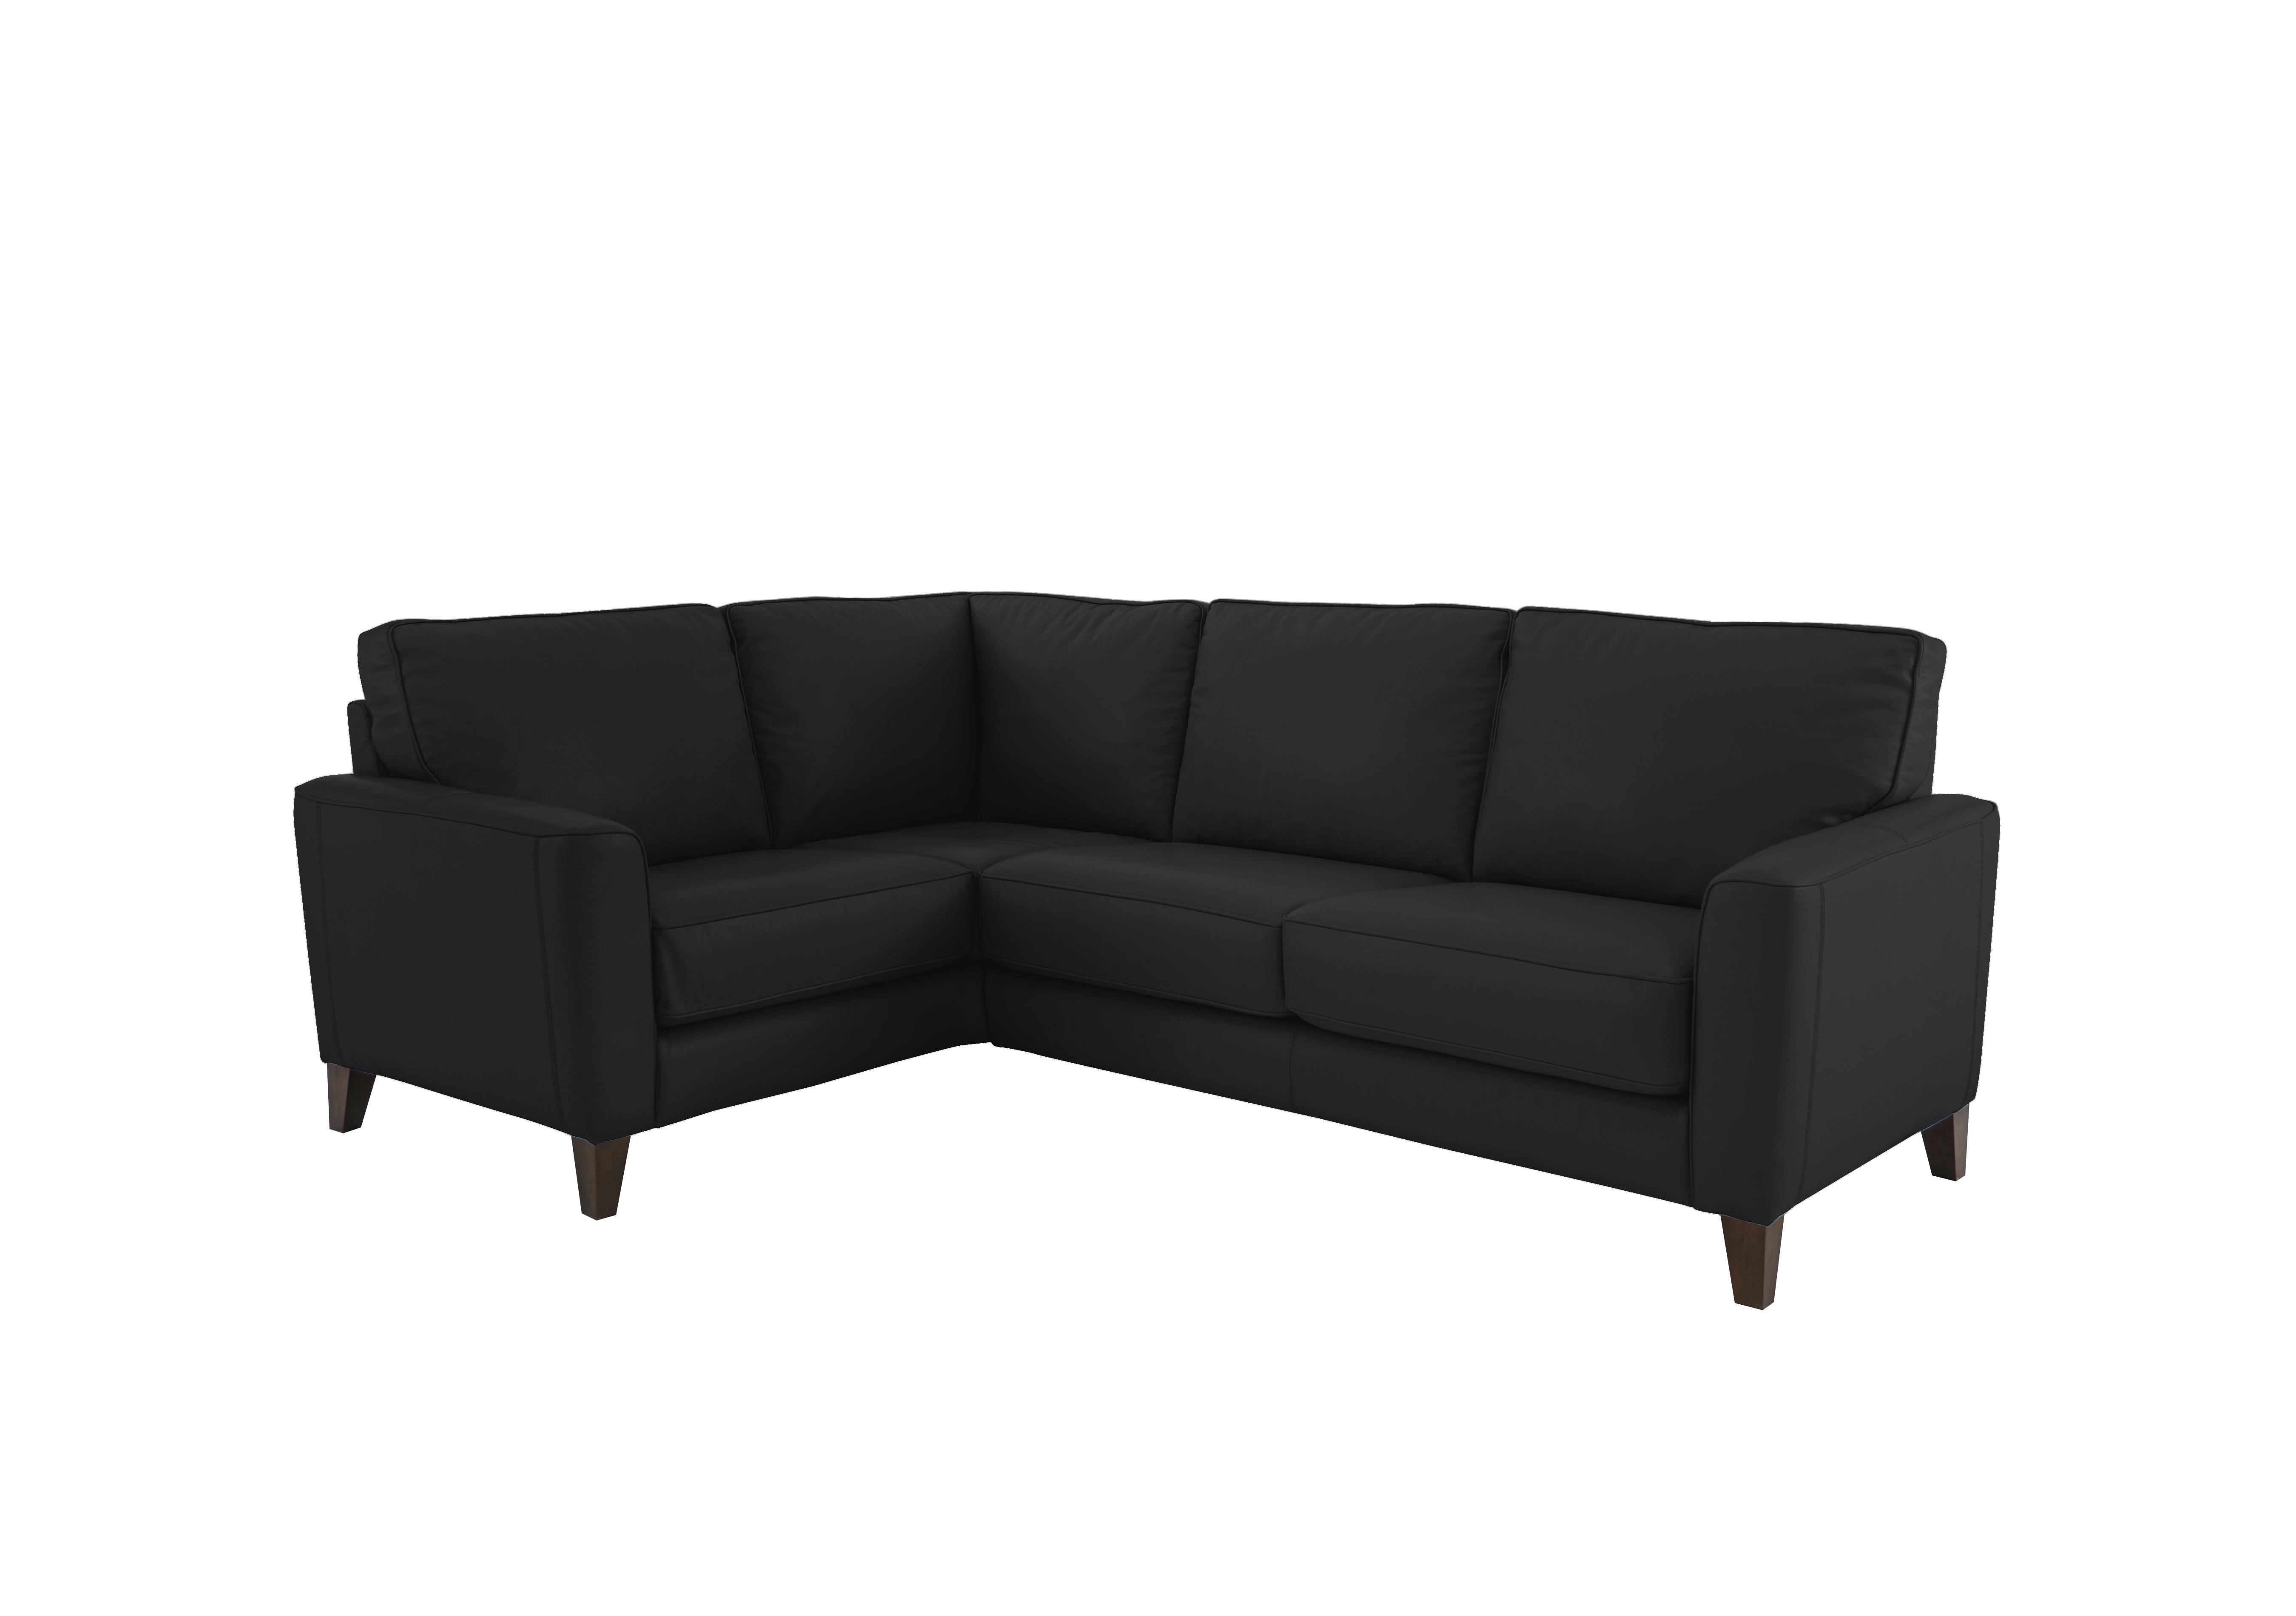 Brondby Small Leather Corner Sofa in Bv-3500 Classic Black on Furniture Village